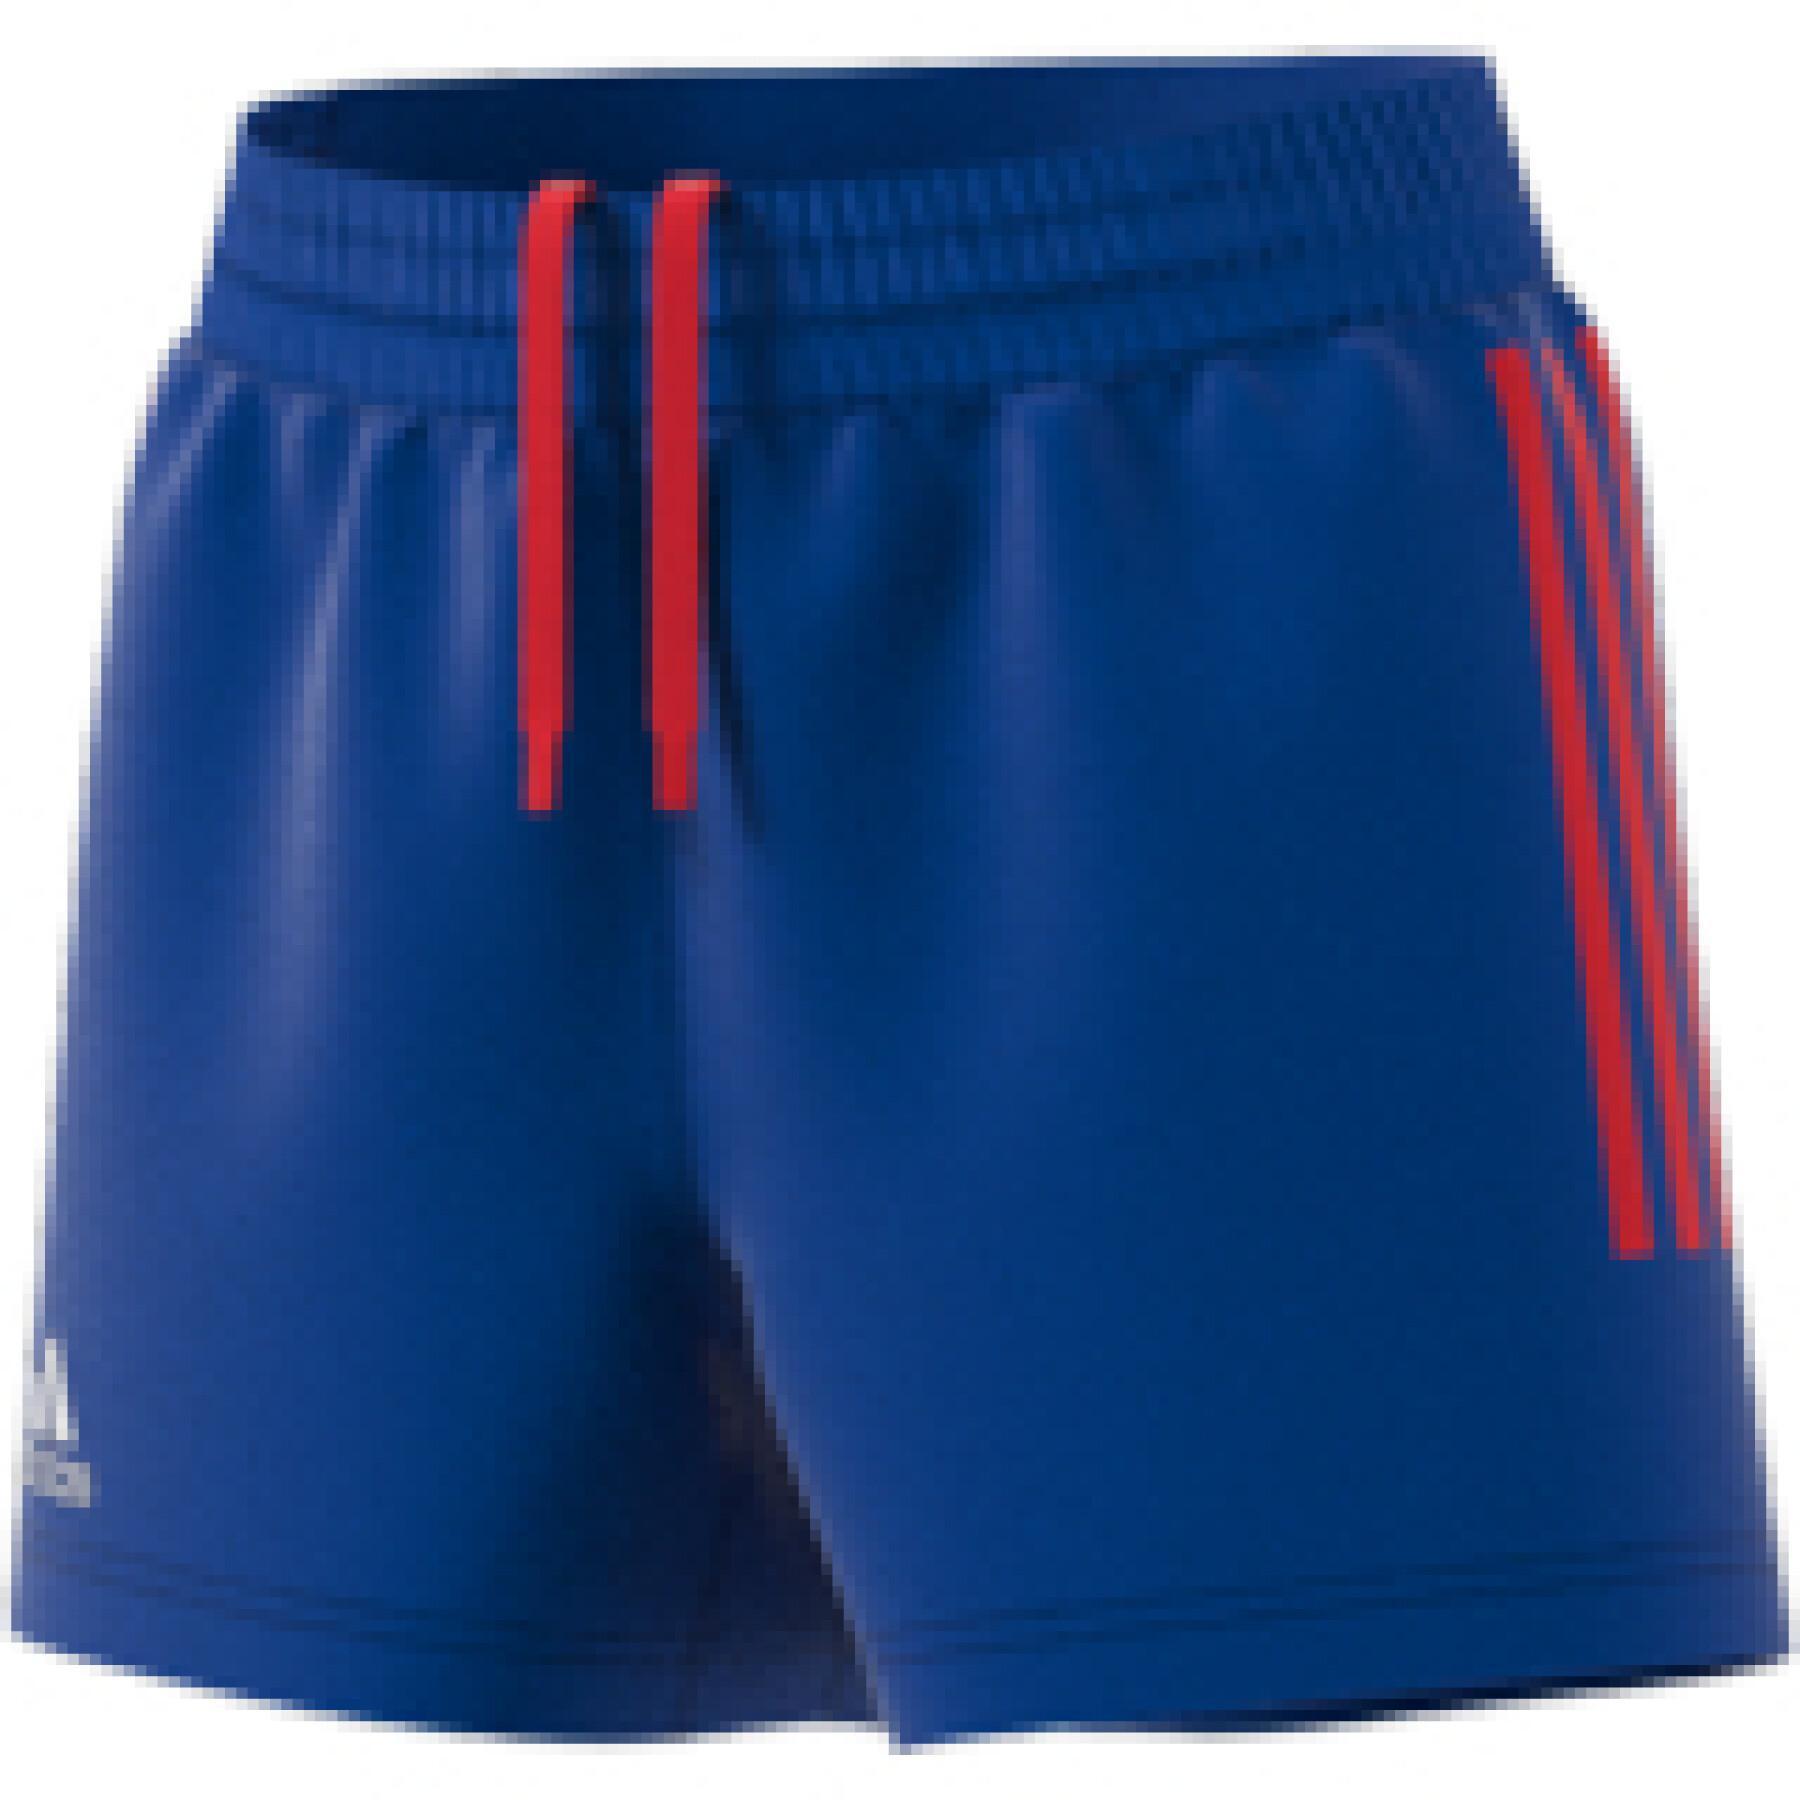 Women's team shorts from France 2021